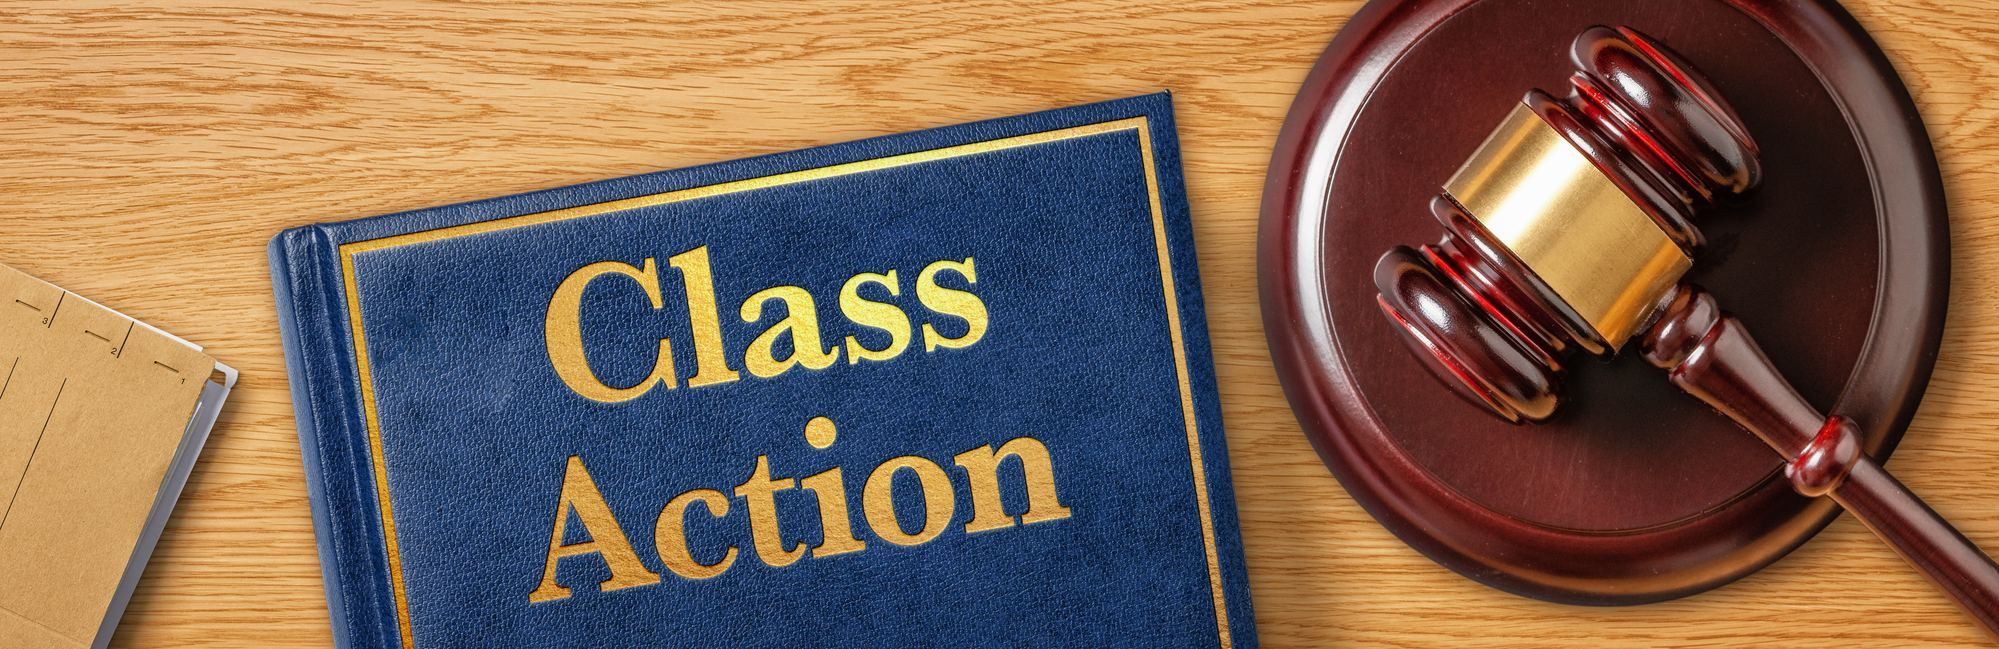 A class action book and gavel regarding what you should know when filing a class action lawsuit.